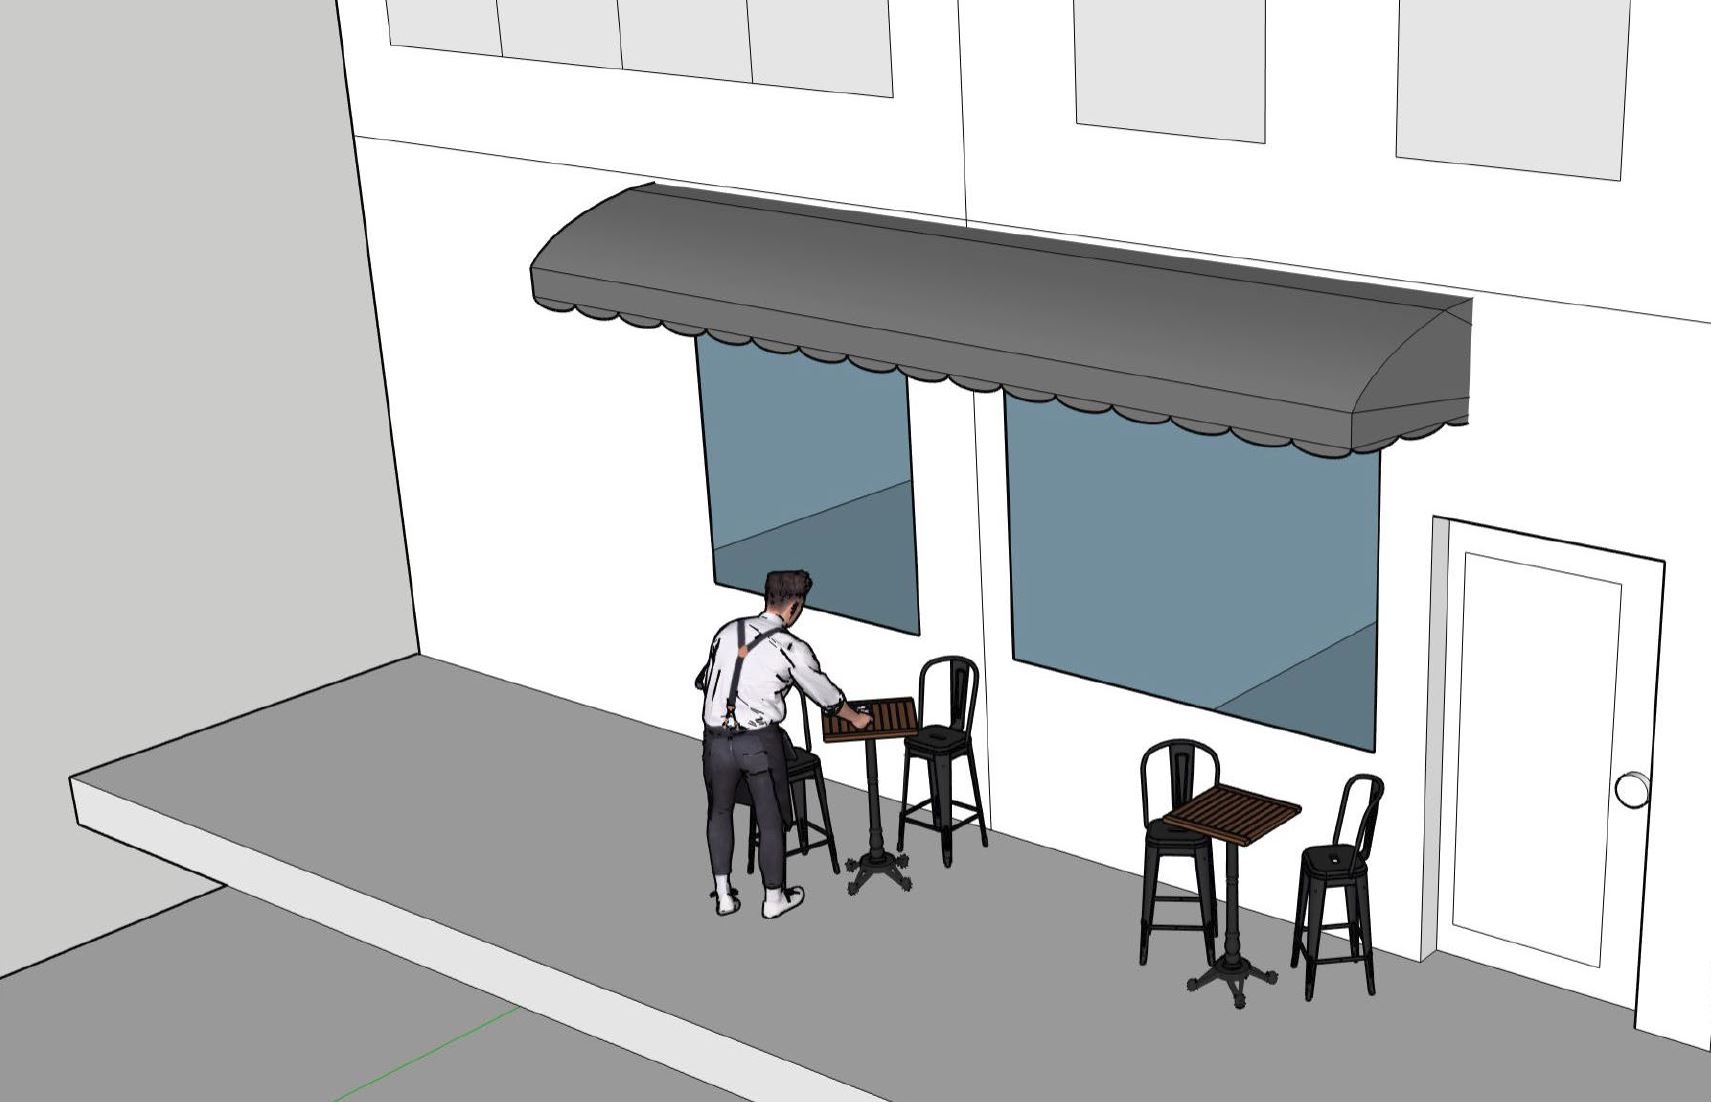 A small patio, with two bistro tables and two metal chairs at each and a server in a white shirt and suspenders serves the table. 